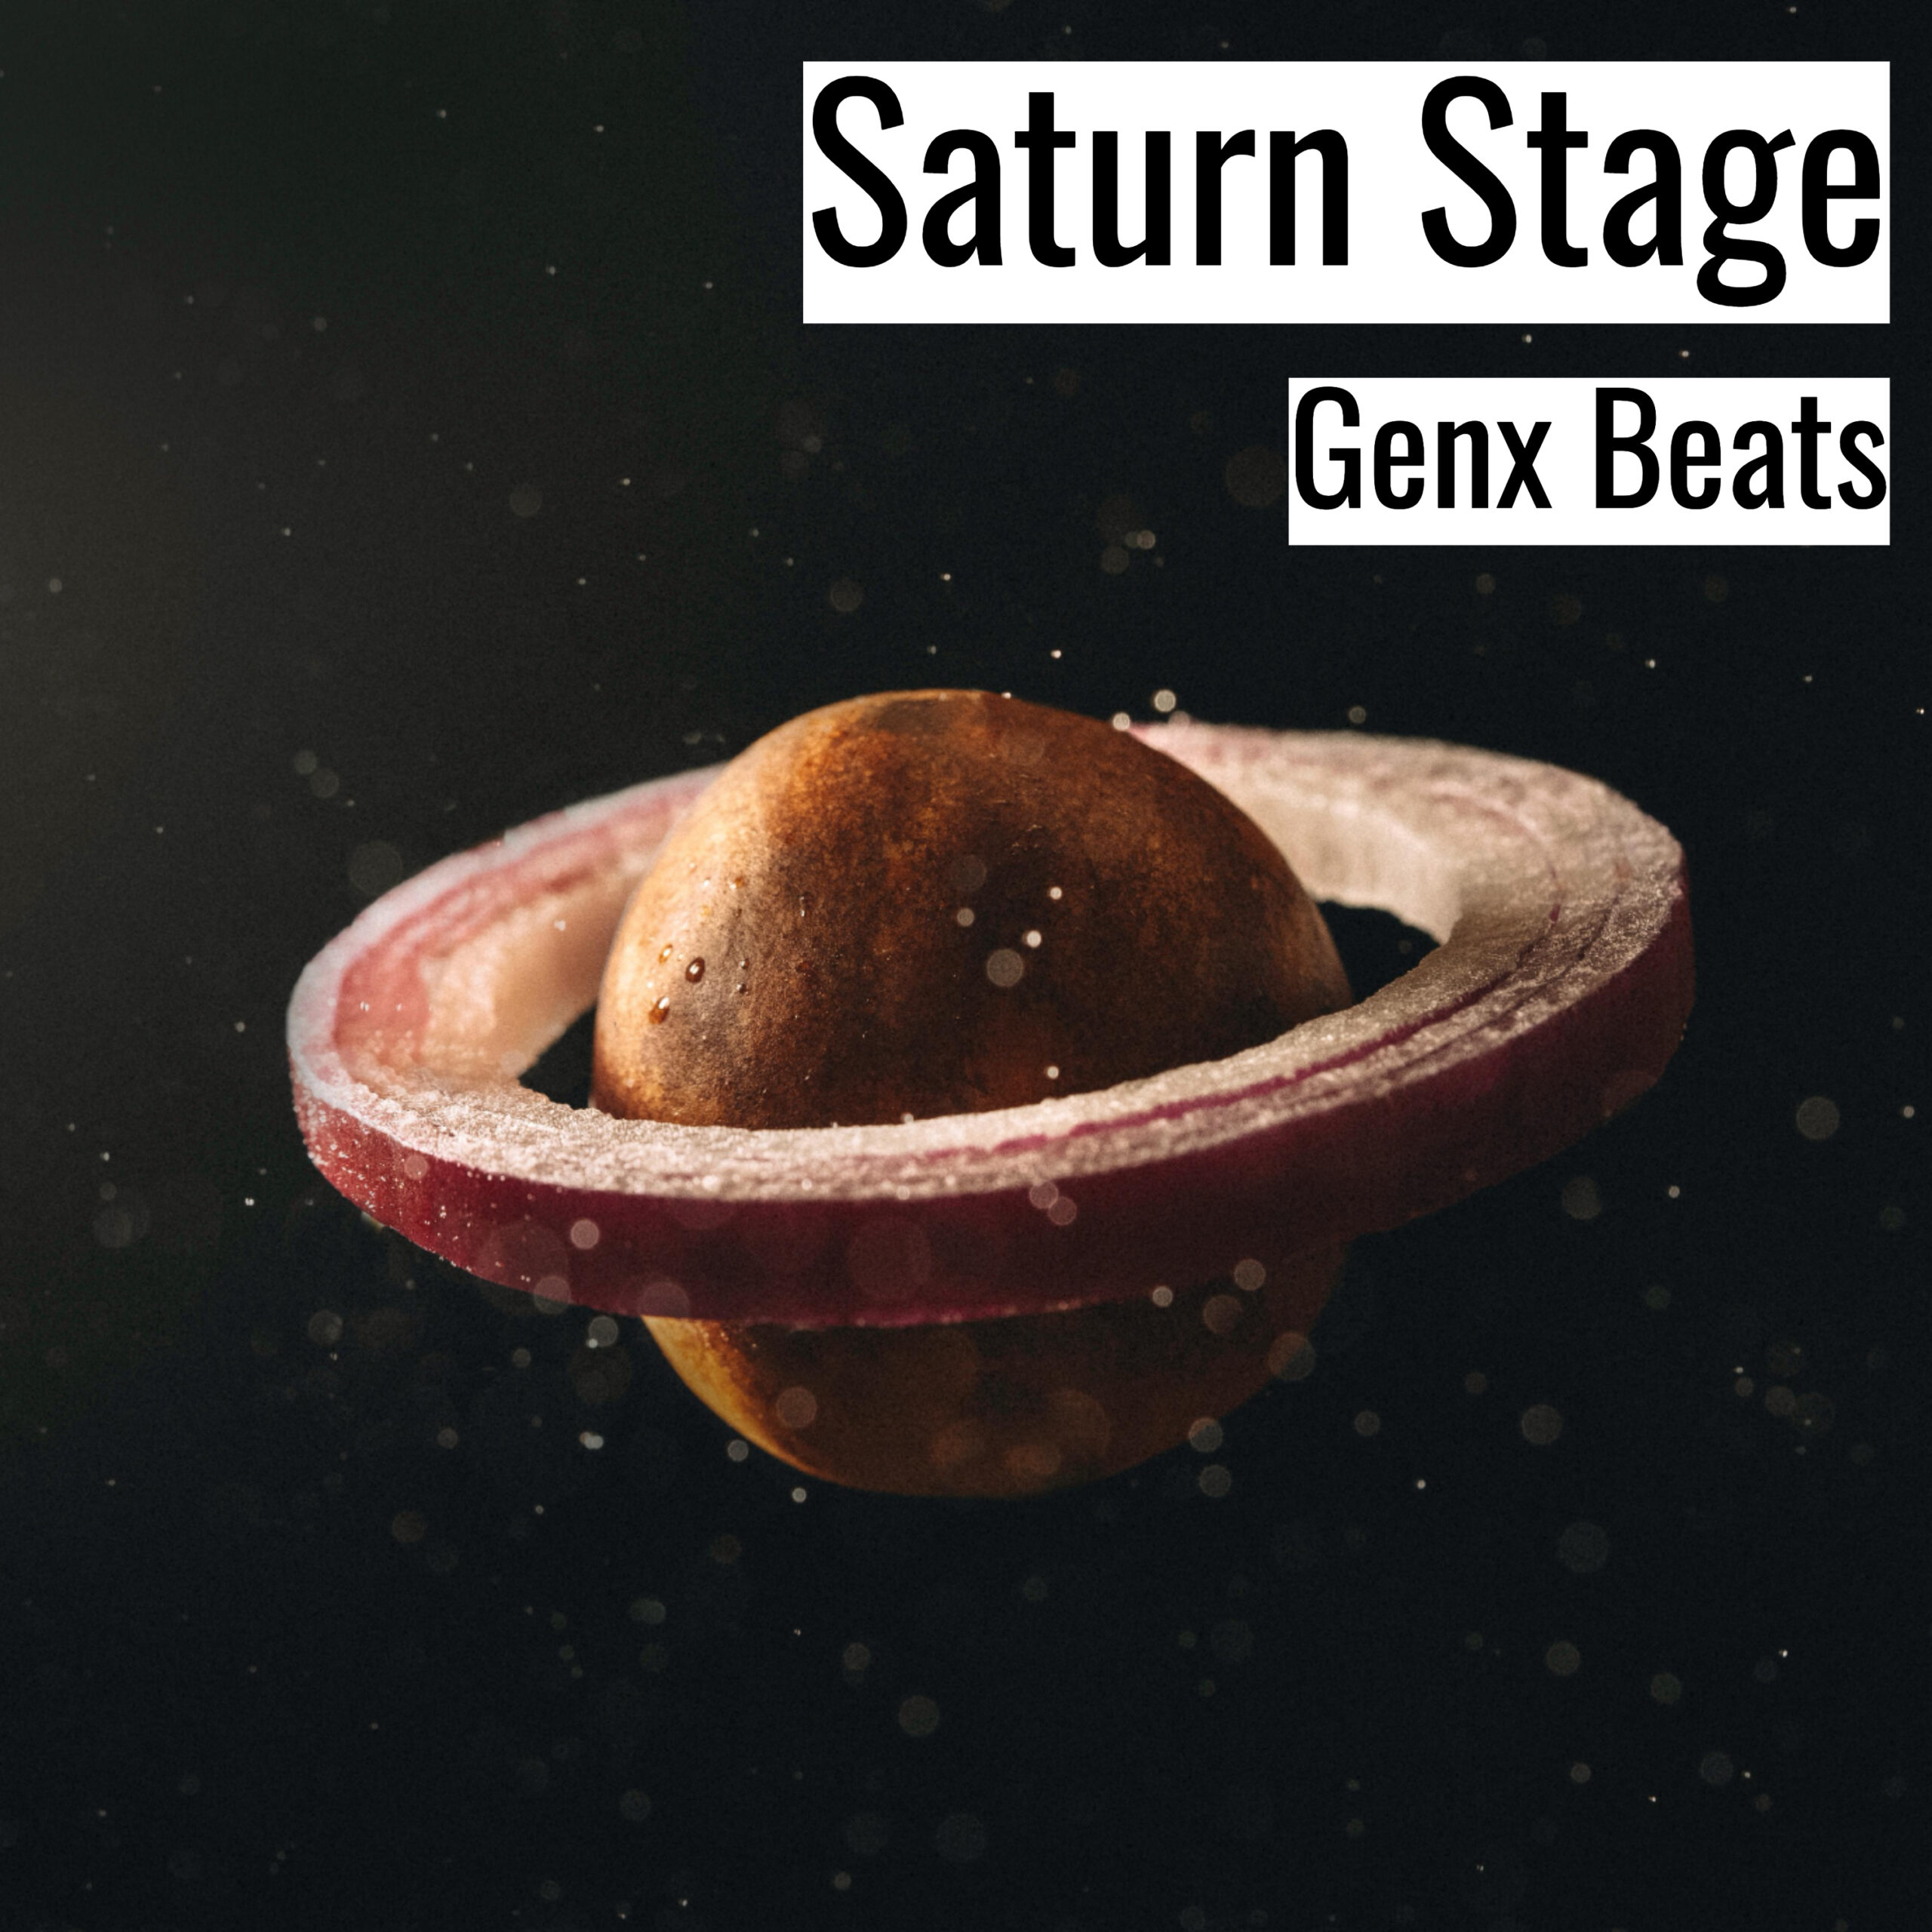 Saturn Stage scaled